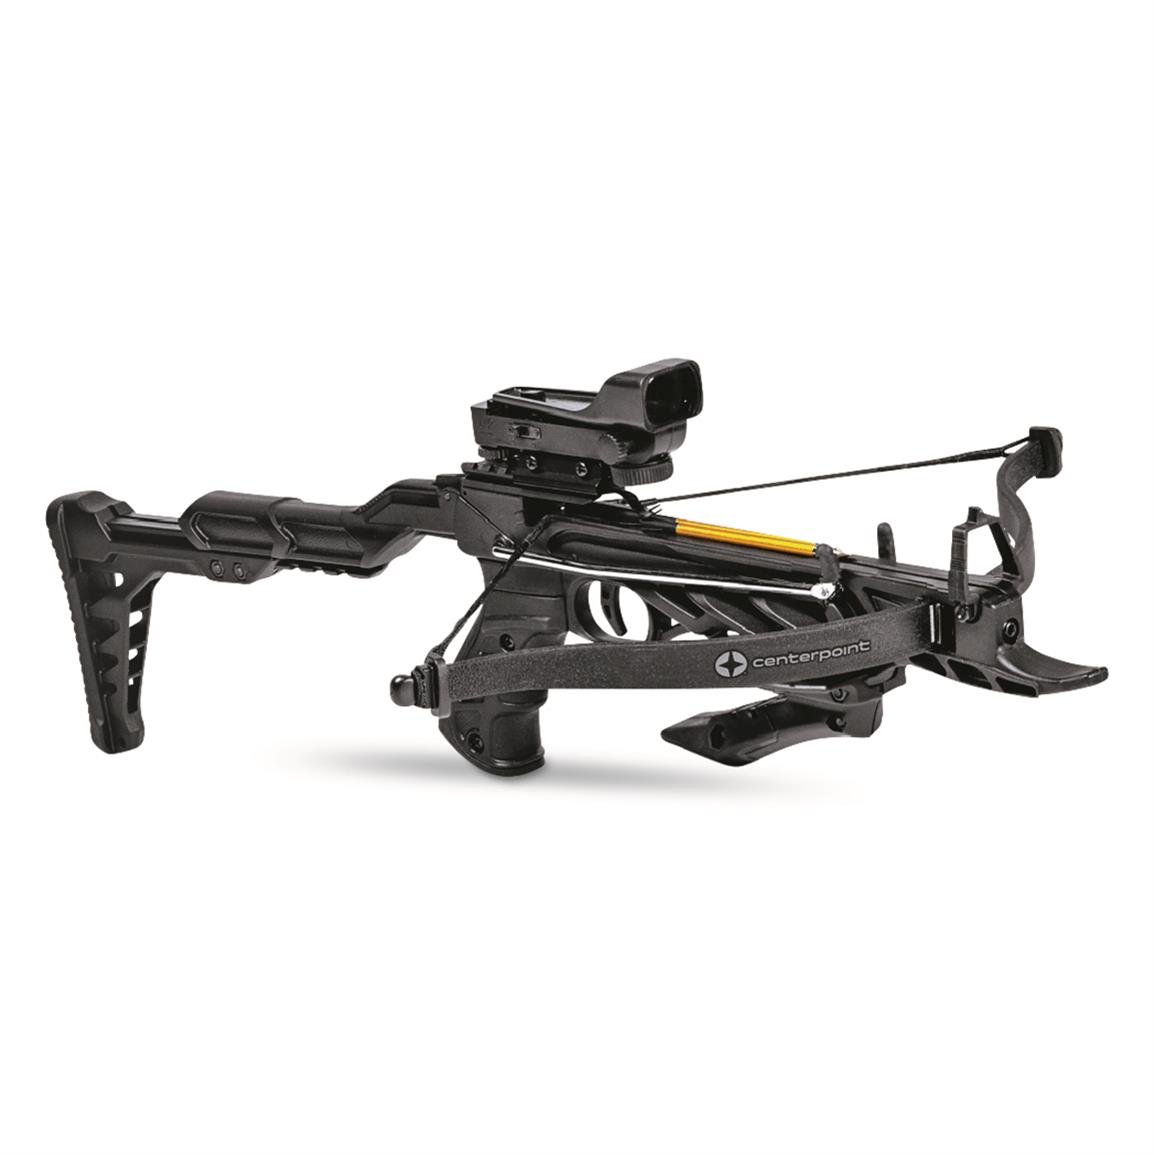 centerpoint-hornet-compact-recurve-crossbow-727807-crossbows-at